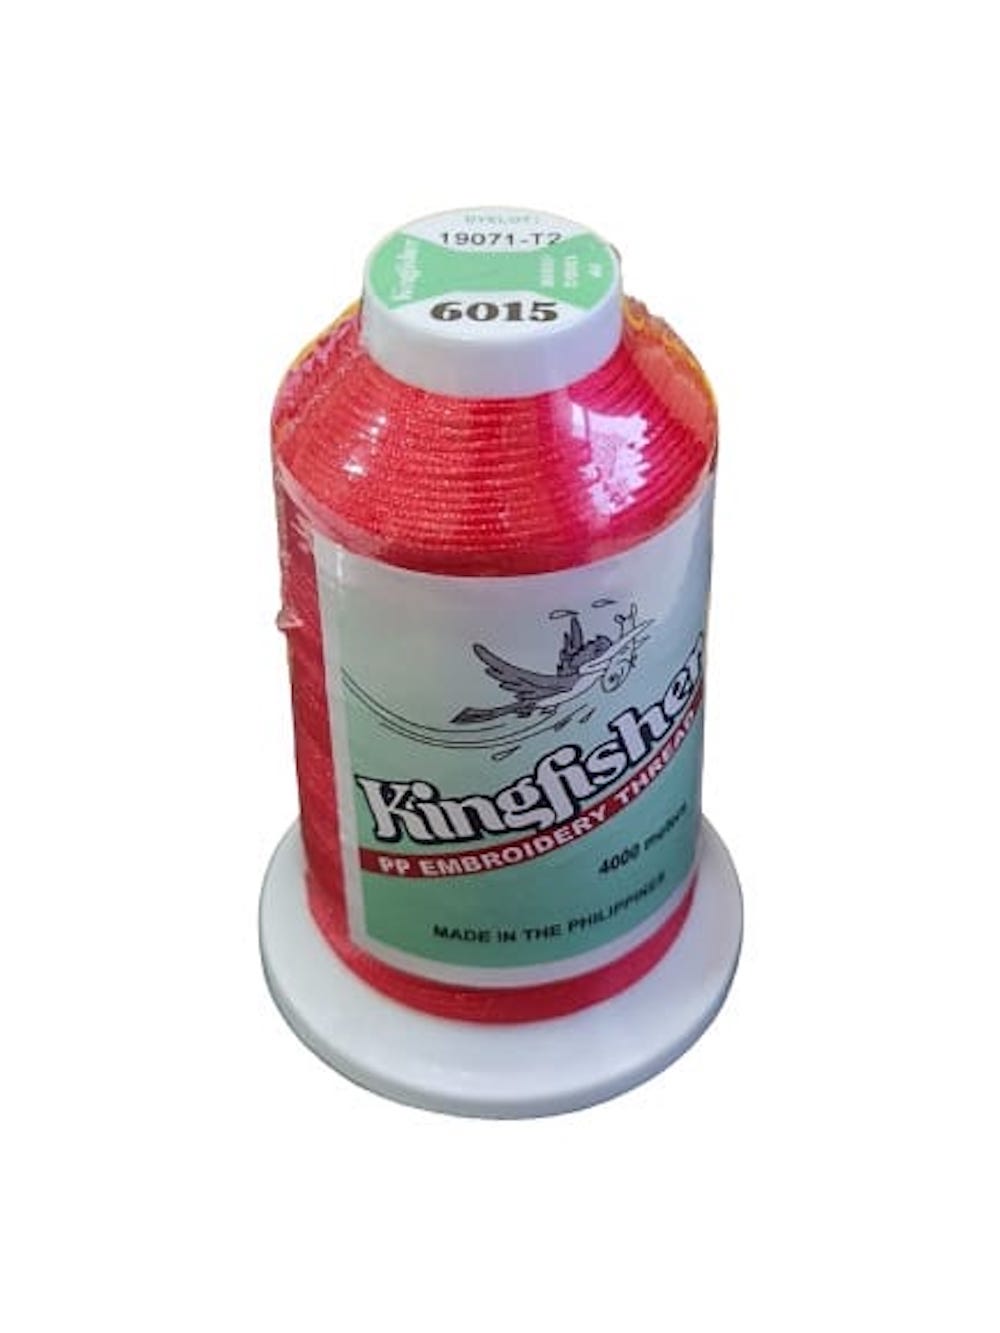 King Fisher Embroidery Thread 4000m 6015 - MY SEWING MALL